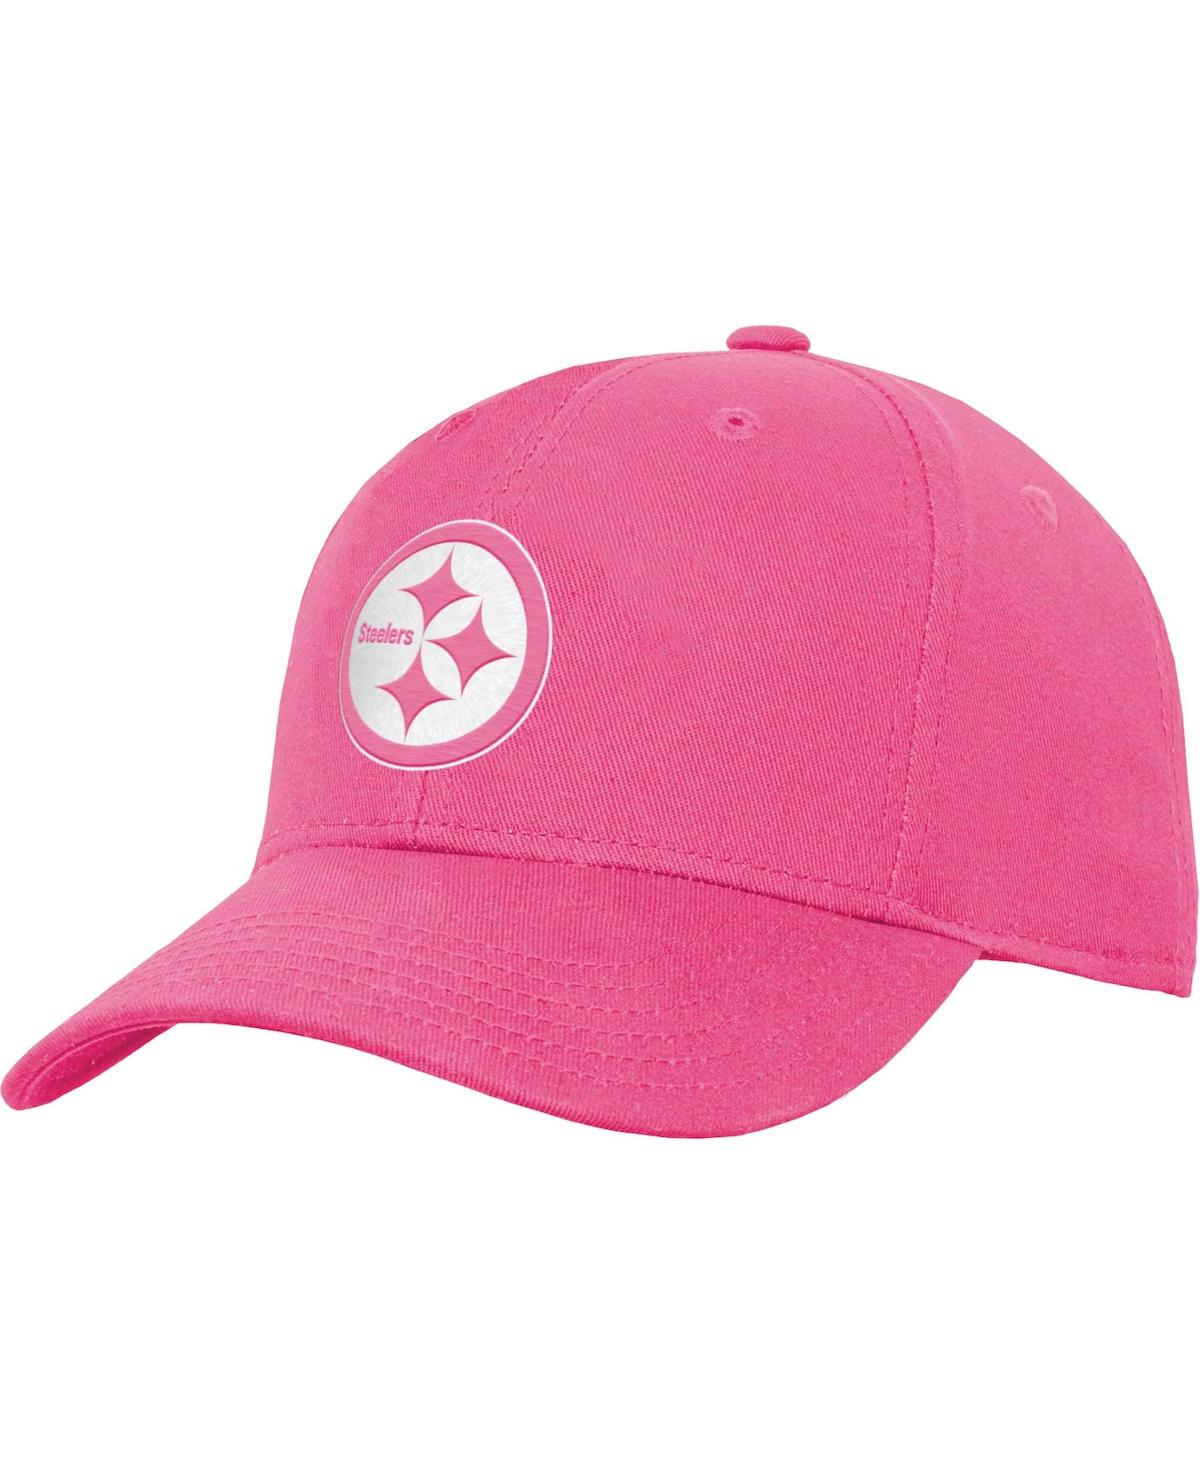 Outerstuff Kids' Girl's Youth Pink Pittsburgh Steelers Adjustable Hat